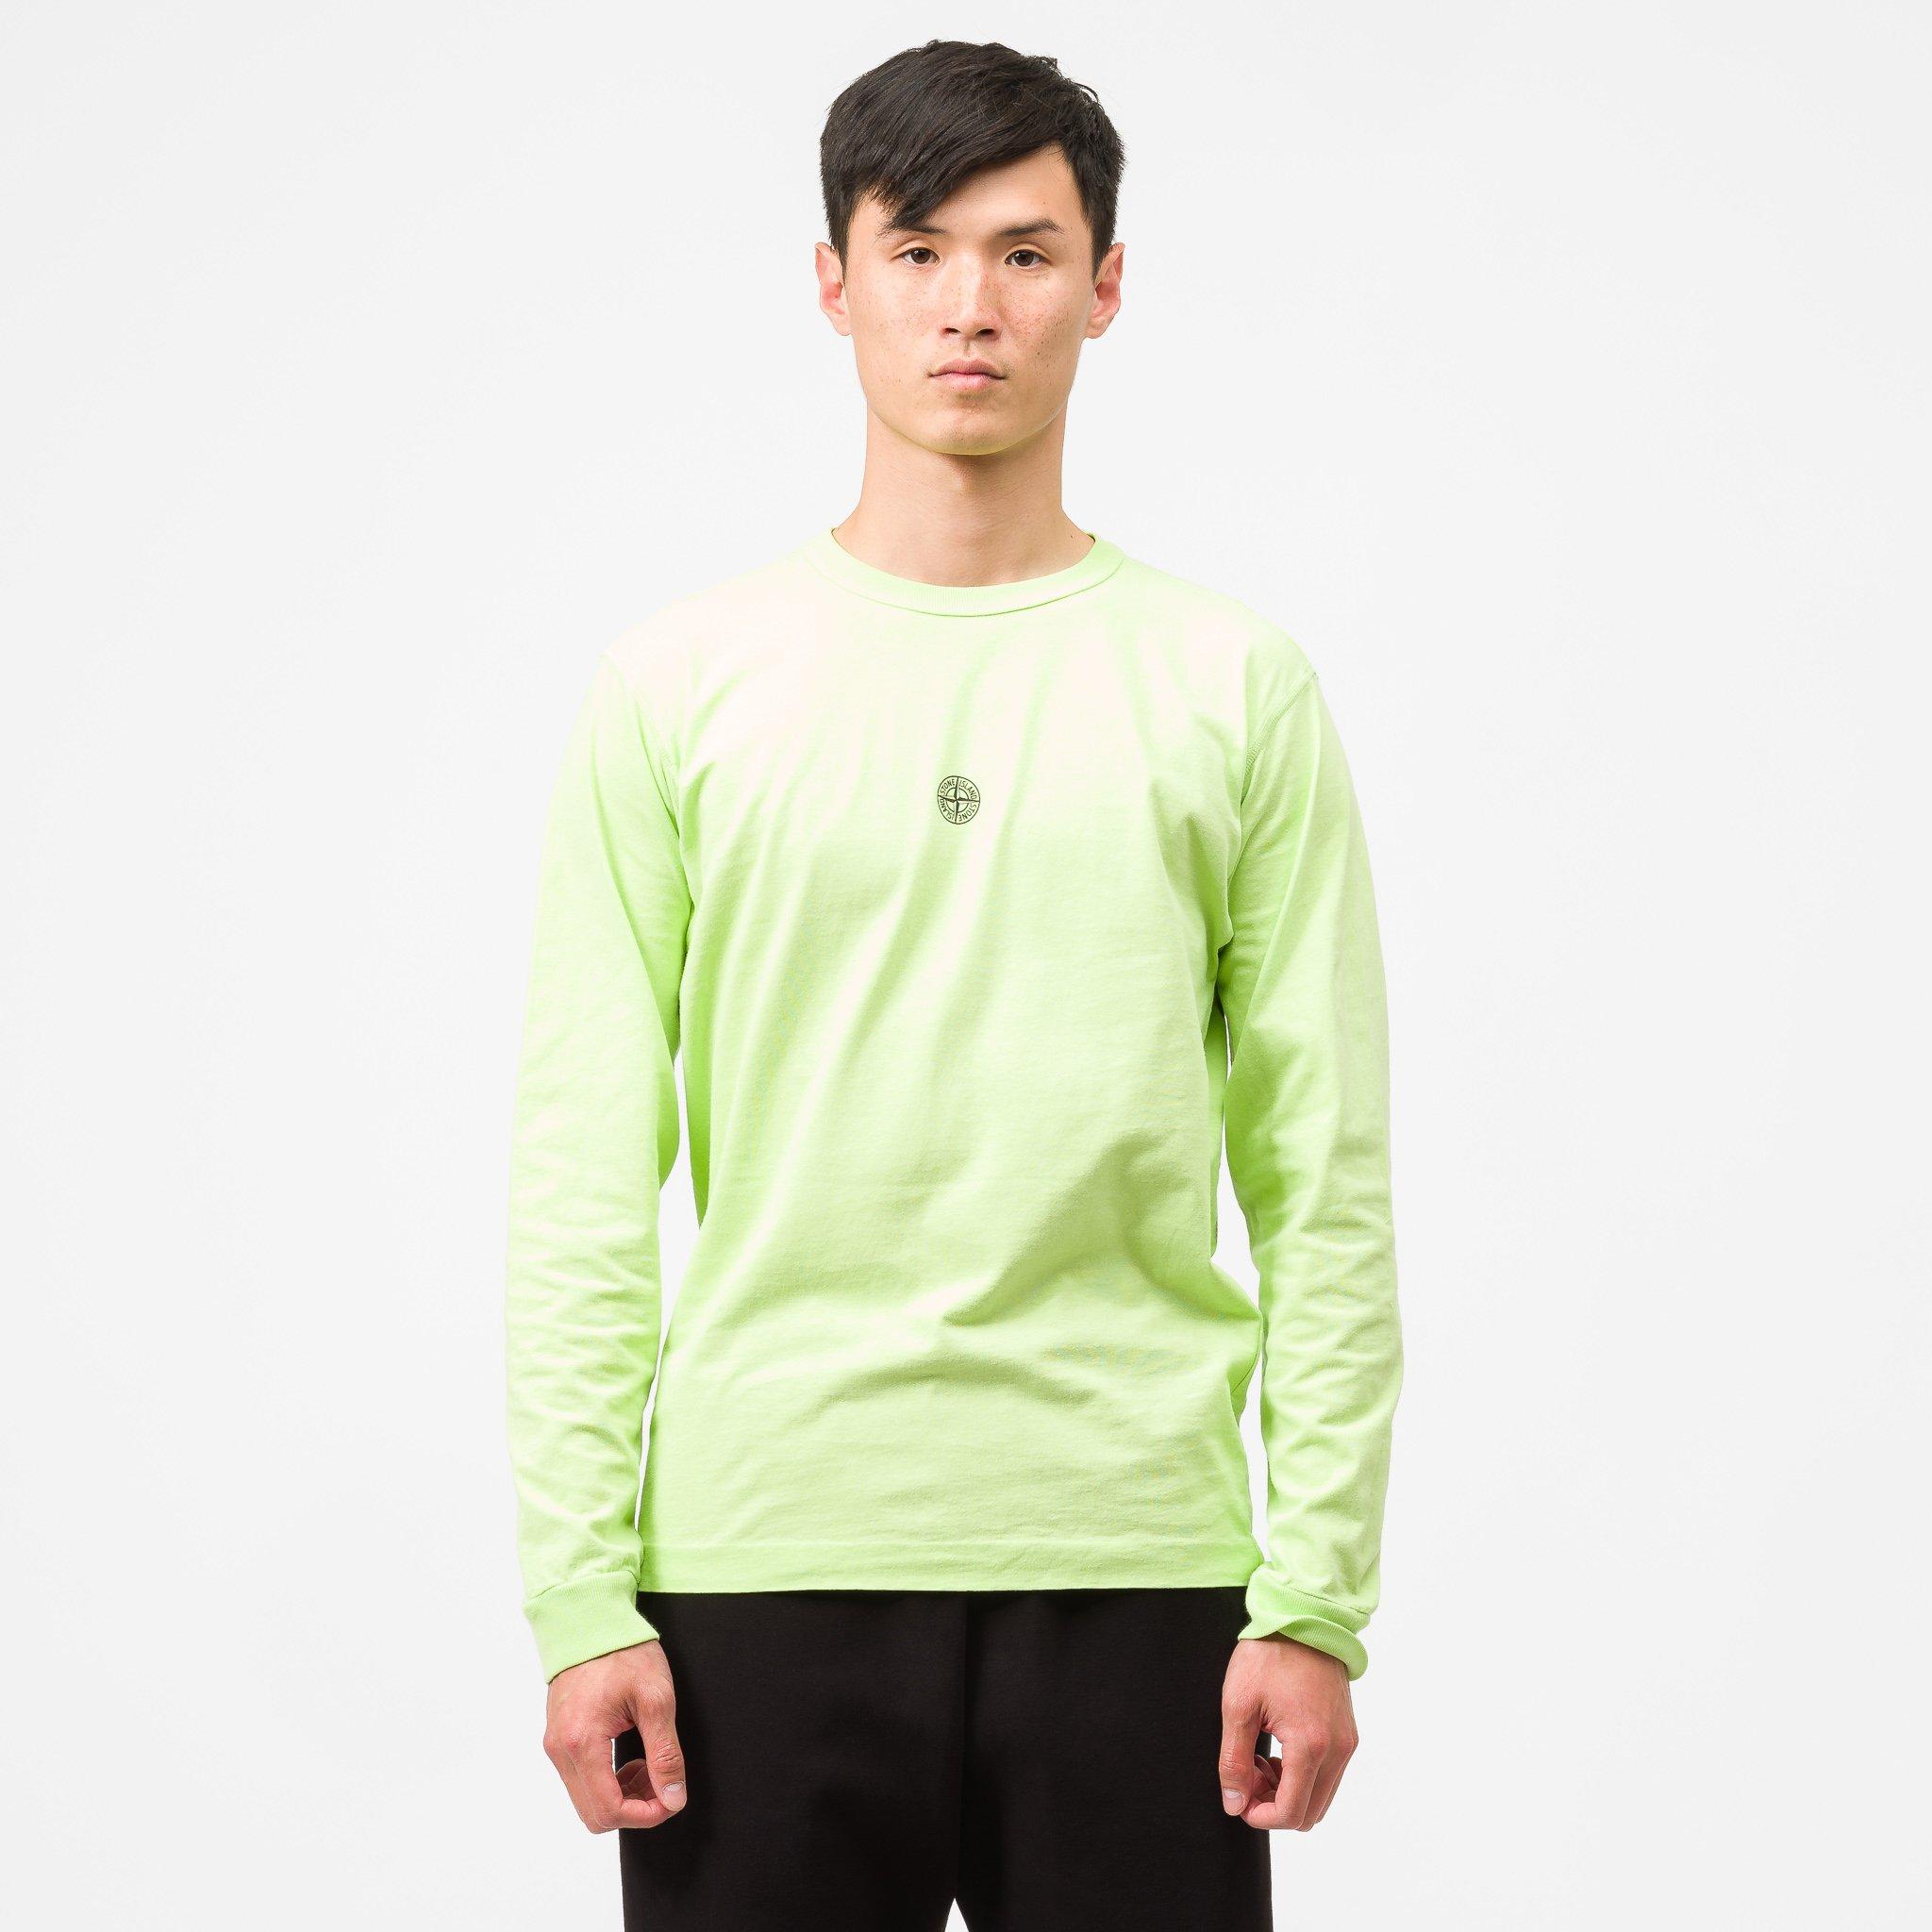 Stone Island Cotton 23484 T-shirt in Pistachio (Green) for Men - Lyst